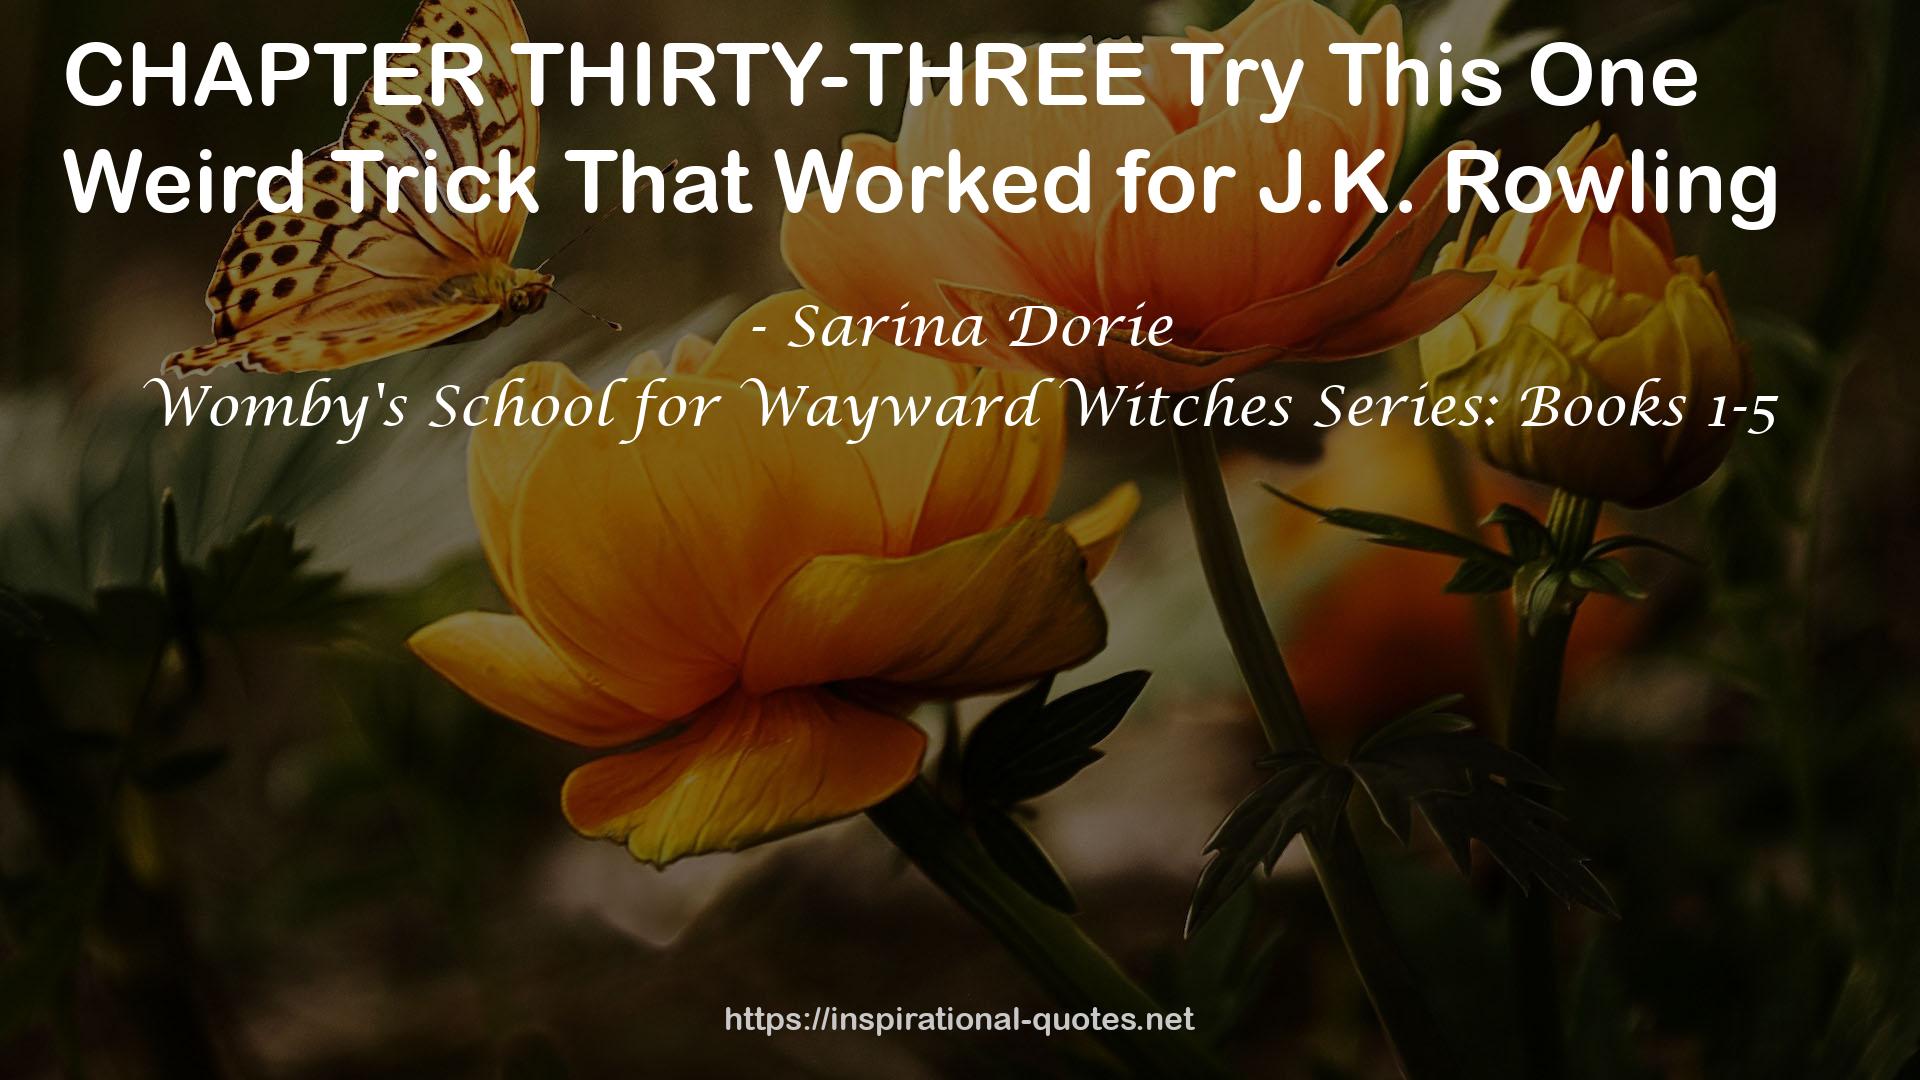 Womby's School for Wayward Witches Series: Books 1-5 QUOTES